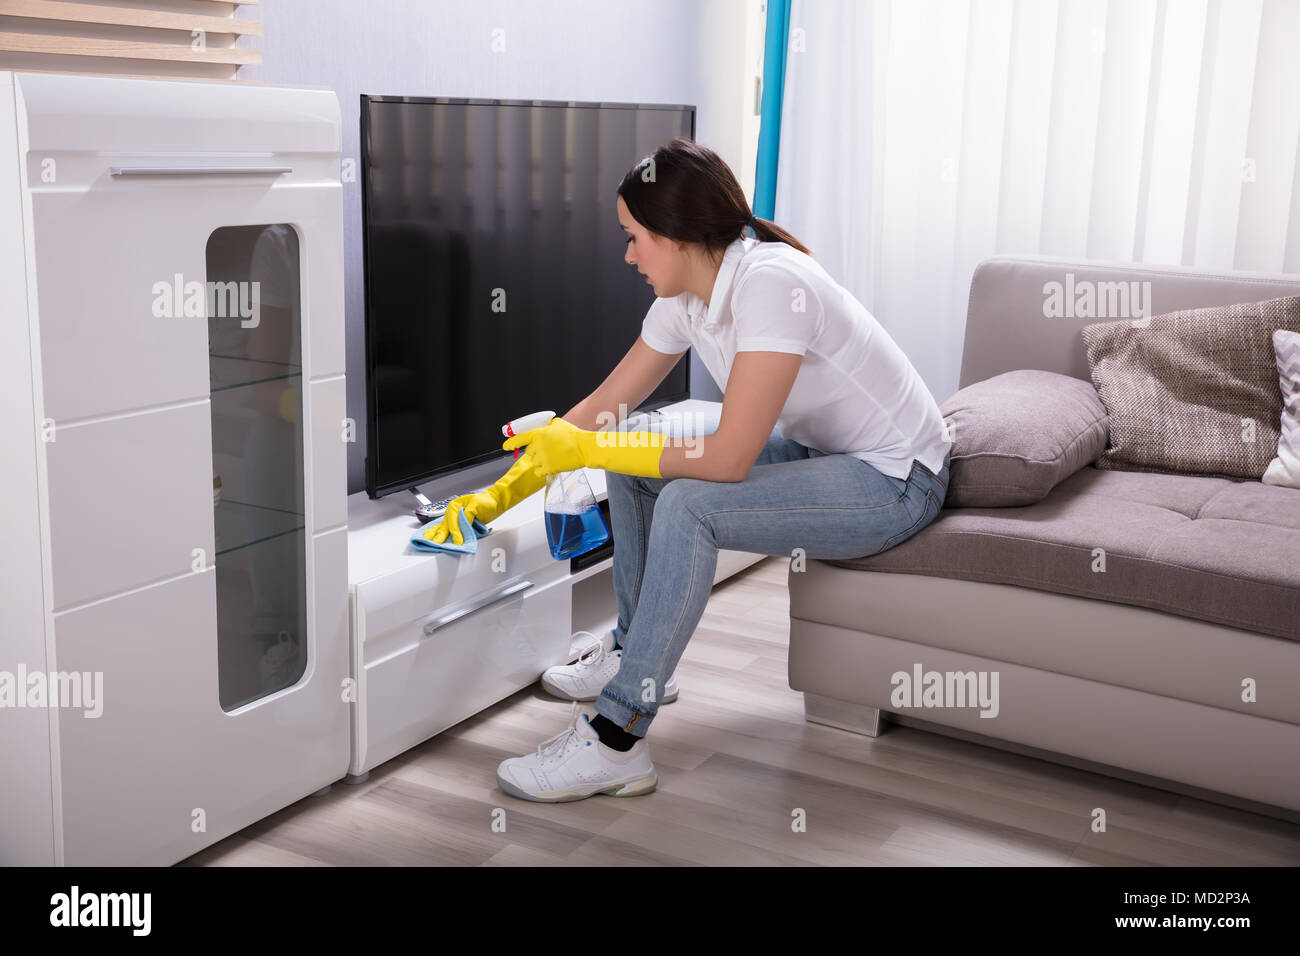 Side View Of A Young Female Janitor Cleaning Furniture At Home Stock Photo